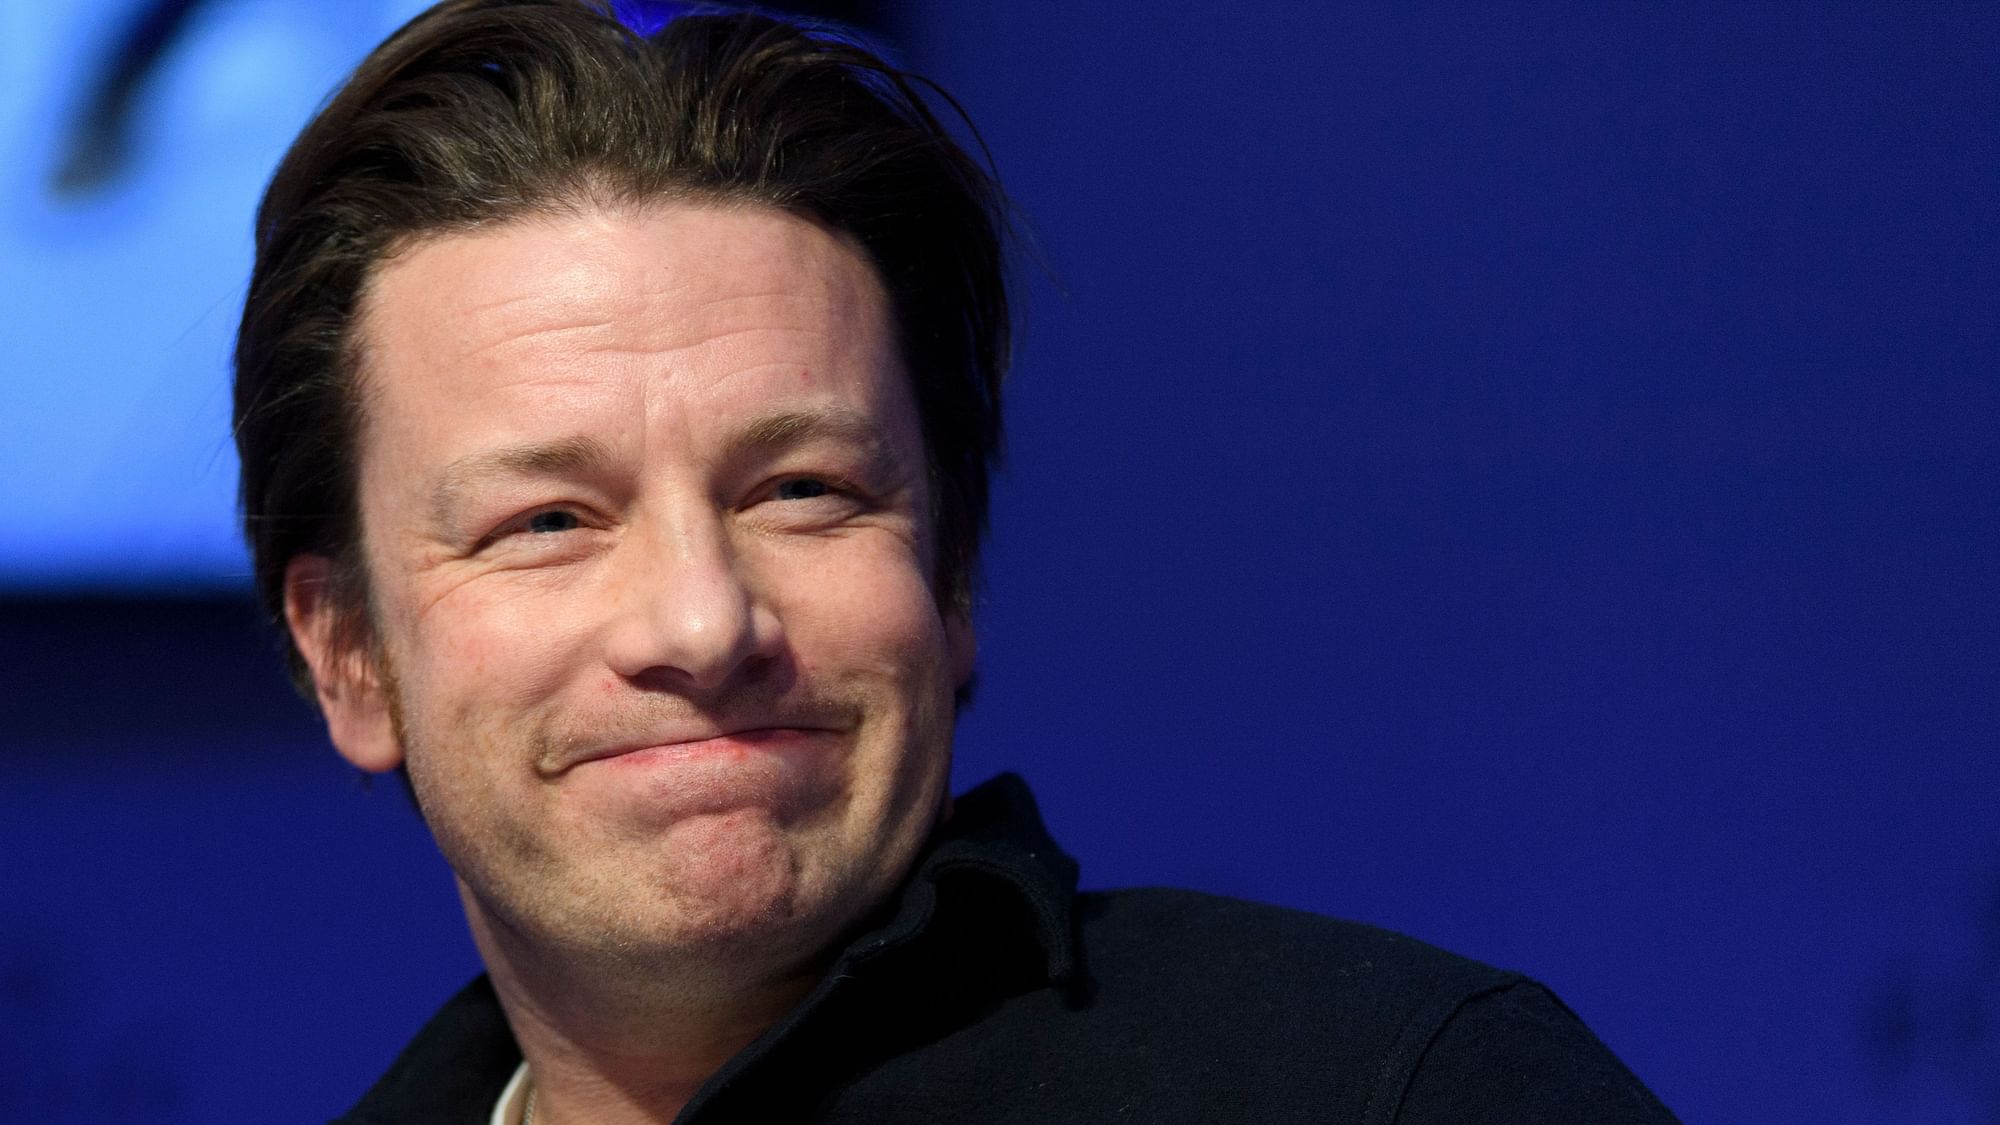 “I’m devastated that our much-loved UK restaurants have gone into administration,” Jamie Oliver wrote on Twitter.